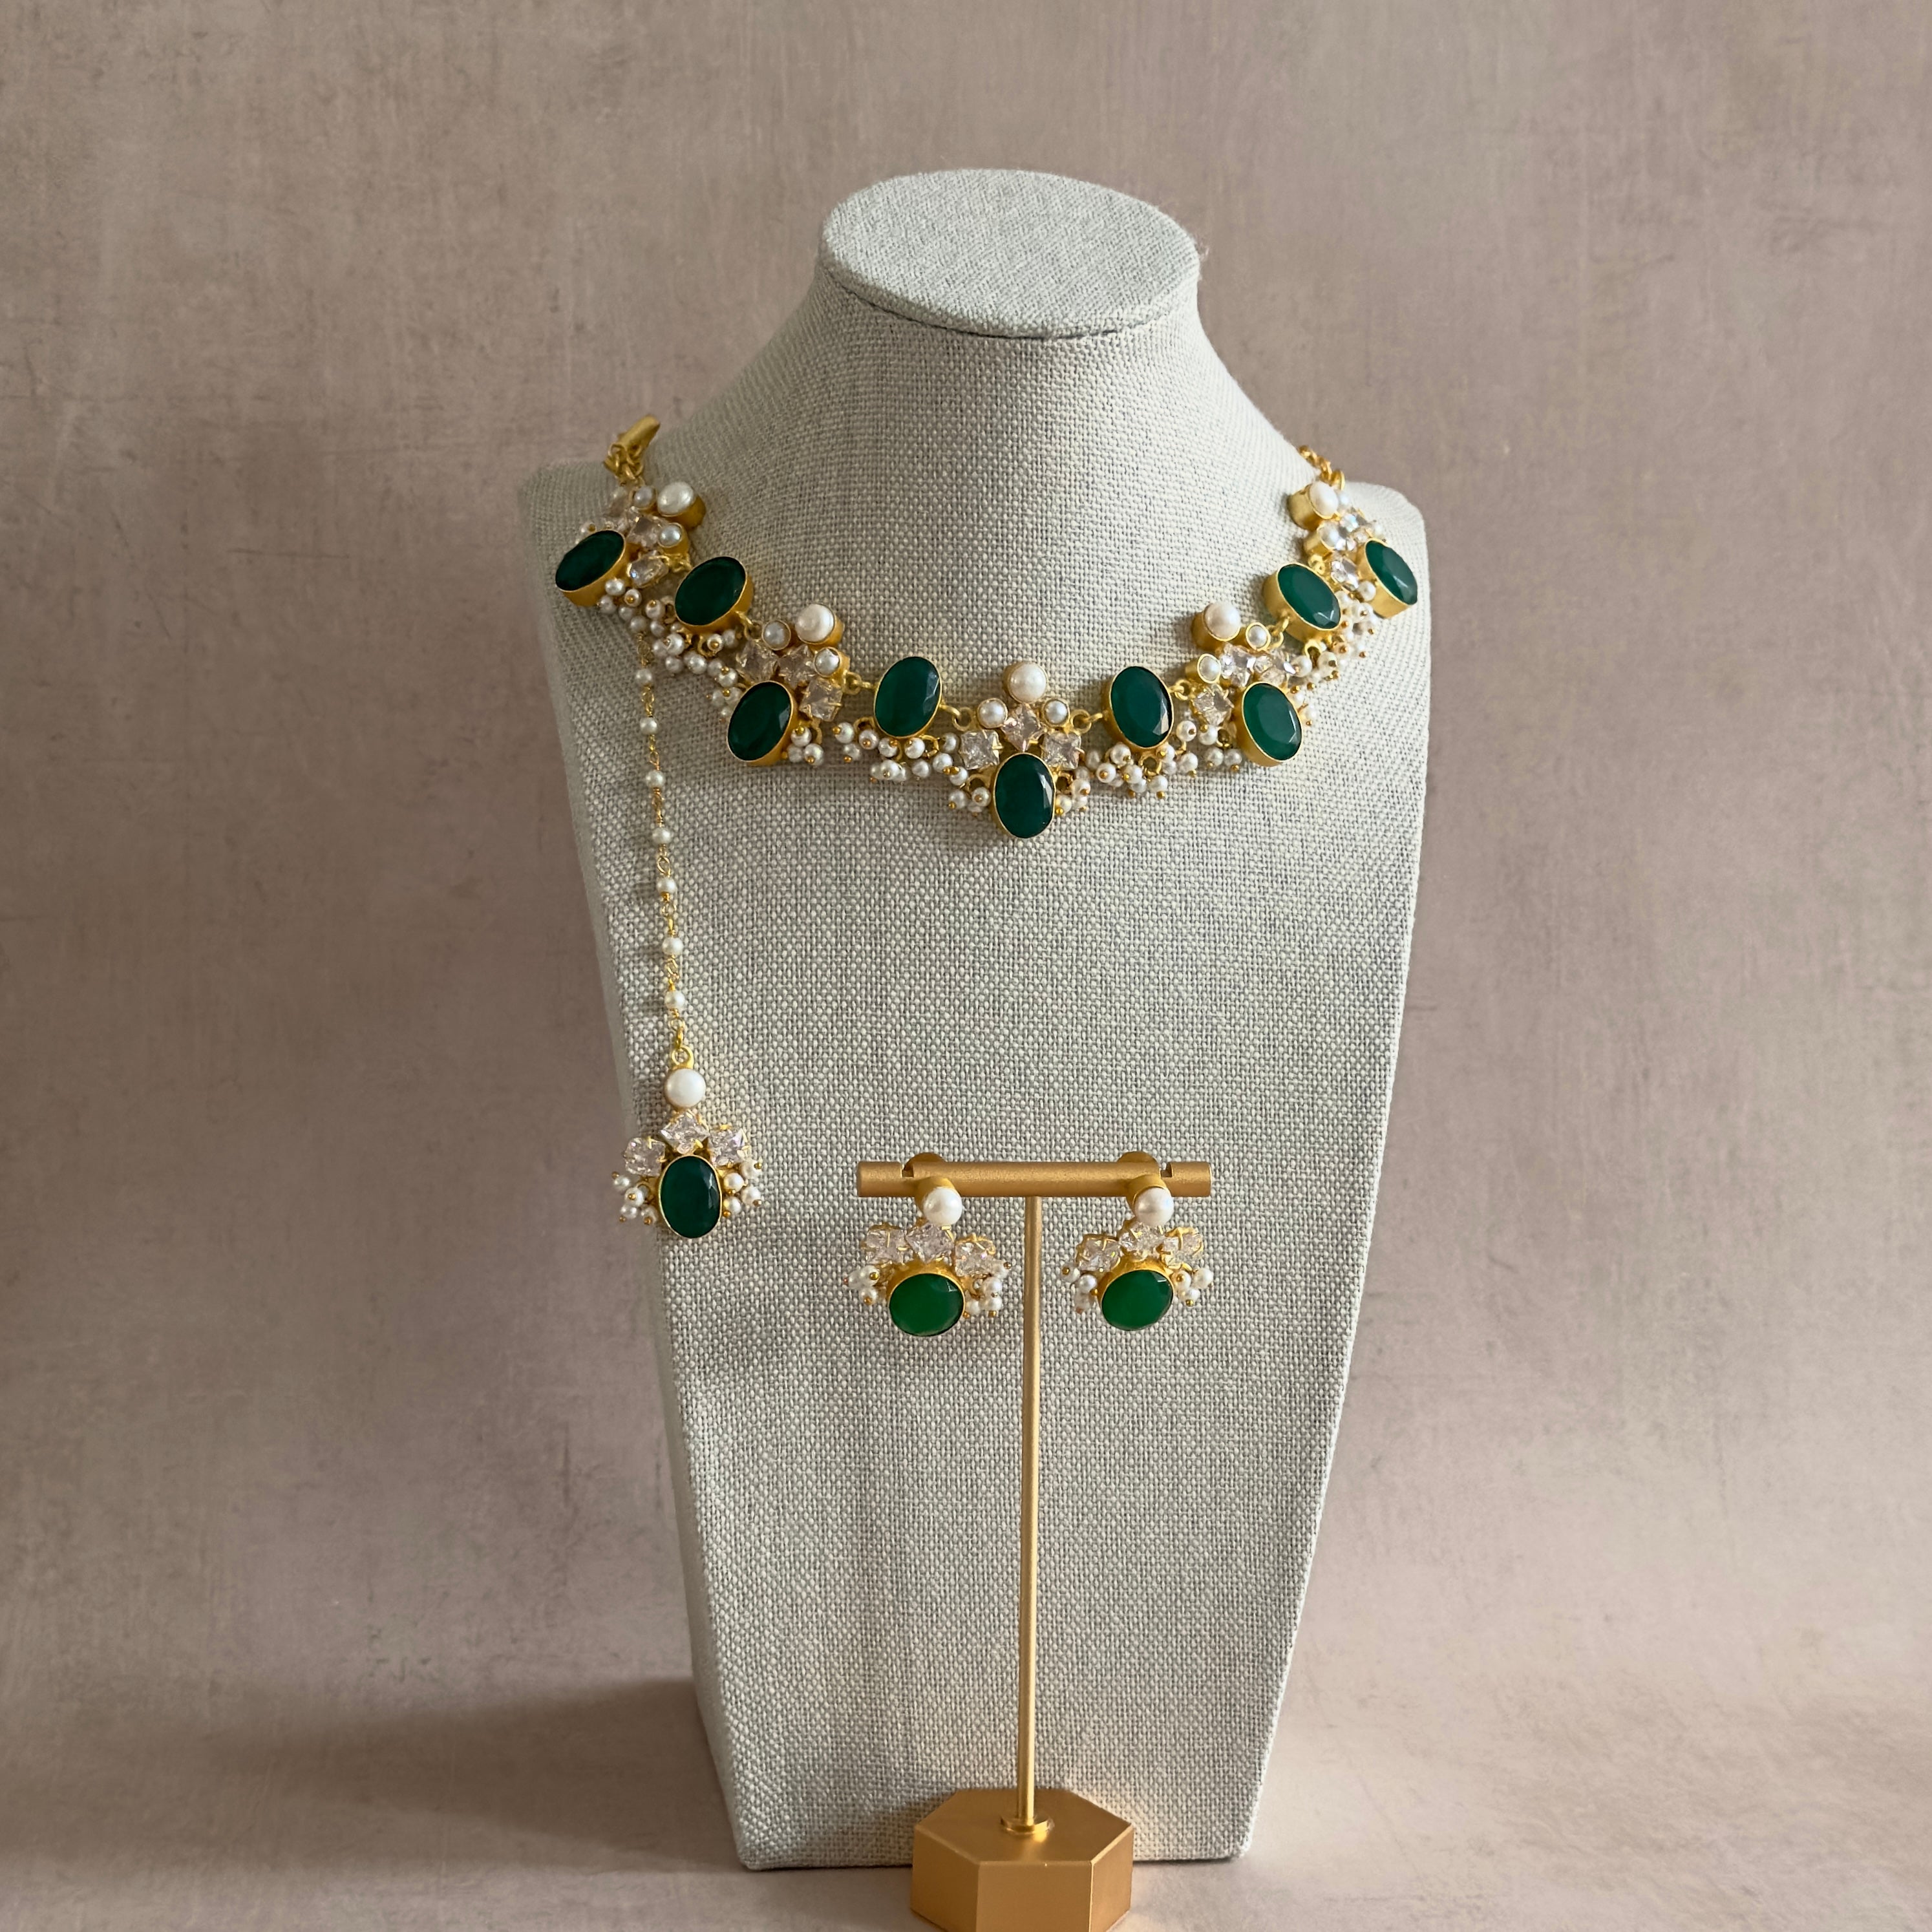 Experience the elegance of our Bisma Green Necklace Set, featuring stunning green onyx stones and freshwater pearls. The adjustable chain adds versatility, and the set comes complete with matching earrings and tikka. Elevate your look with this exclusive, sophisticated accessory.